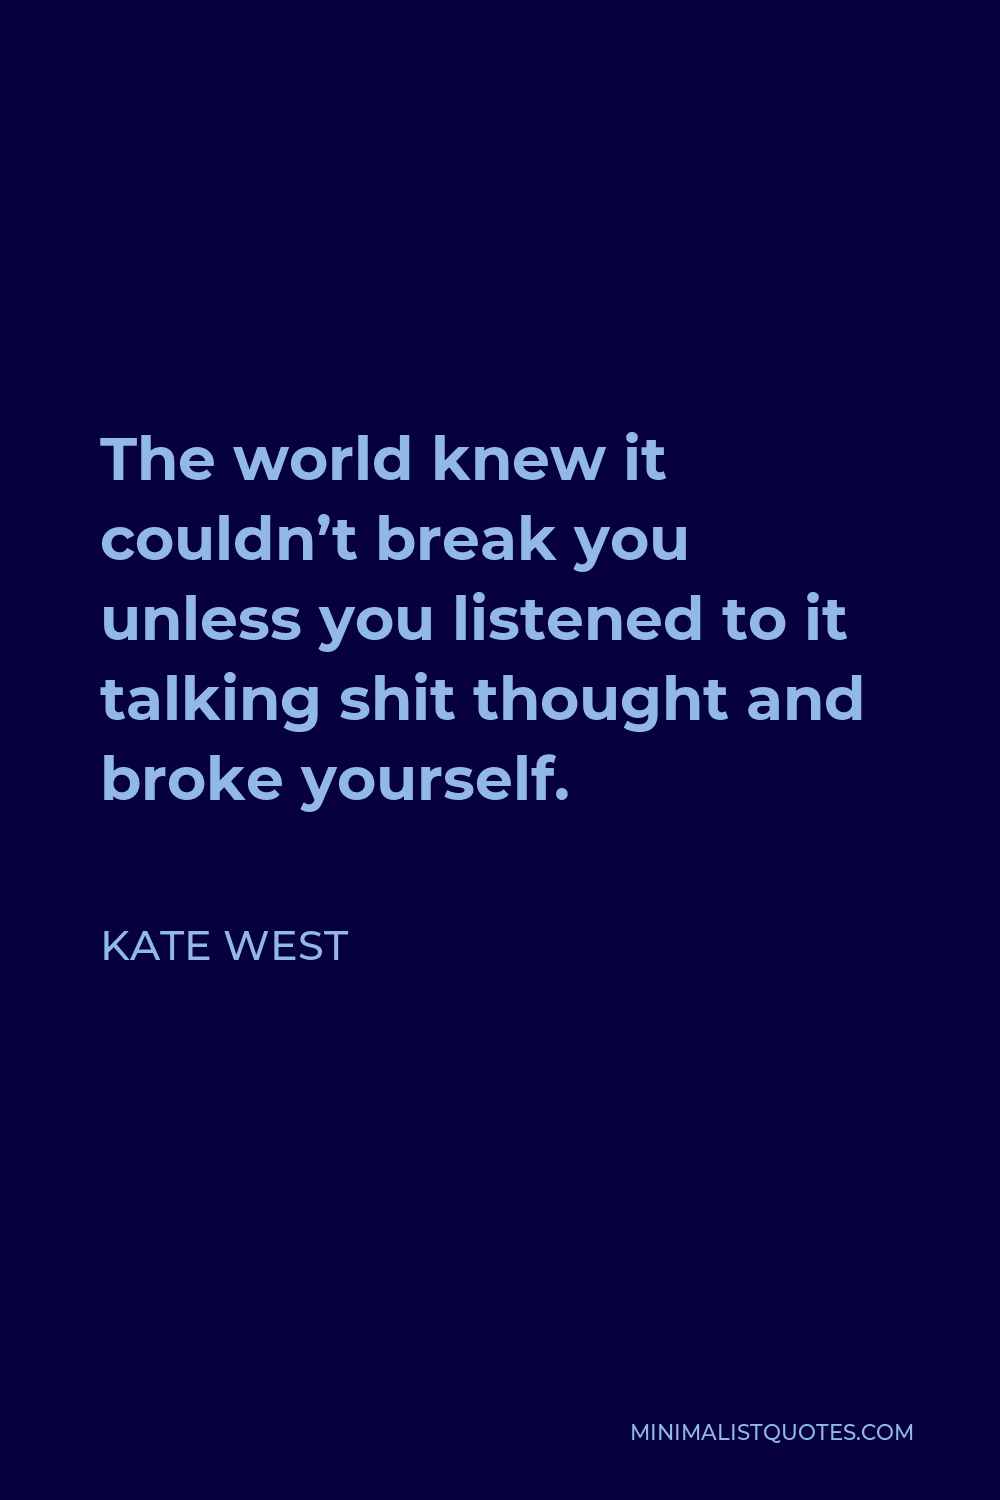 Kate West Quote - The world knew it couldn’t break you unless you listened to it talking shit thought and broke yourself.